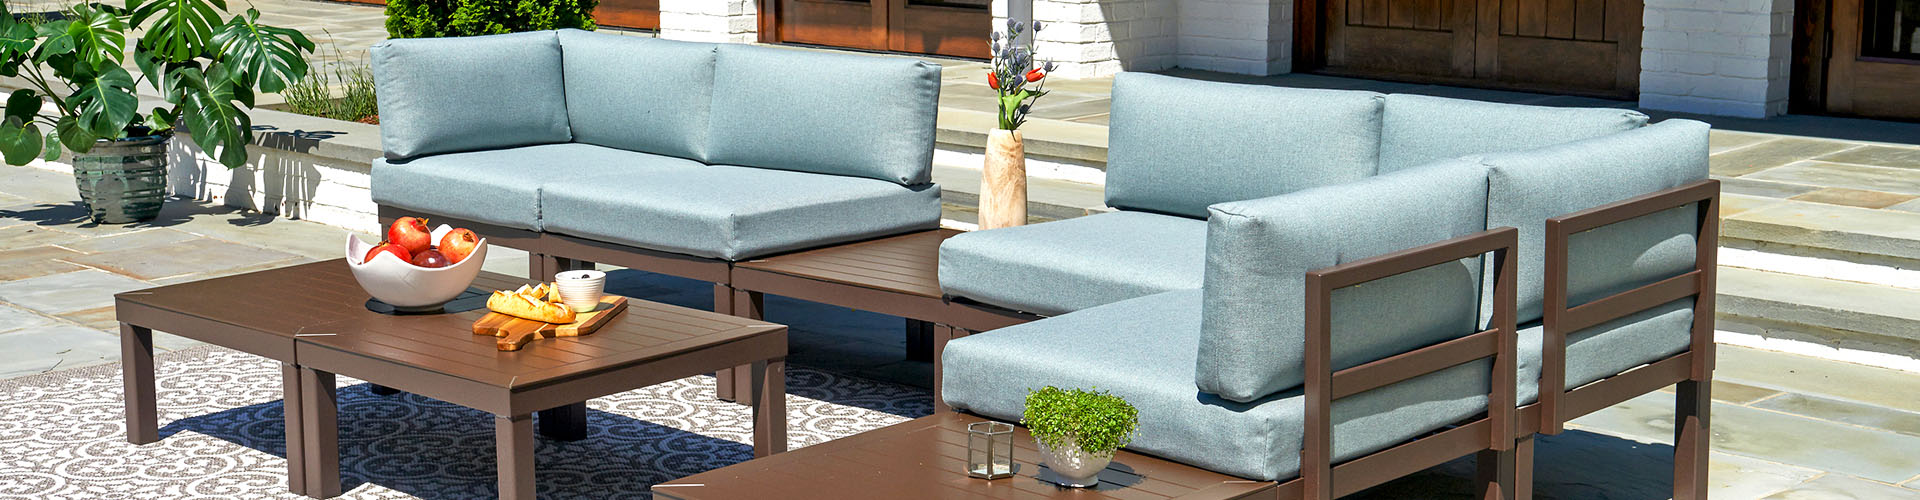 Banner featuring outdoor patio decorated with Telescope Casual brand furniture